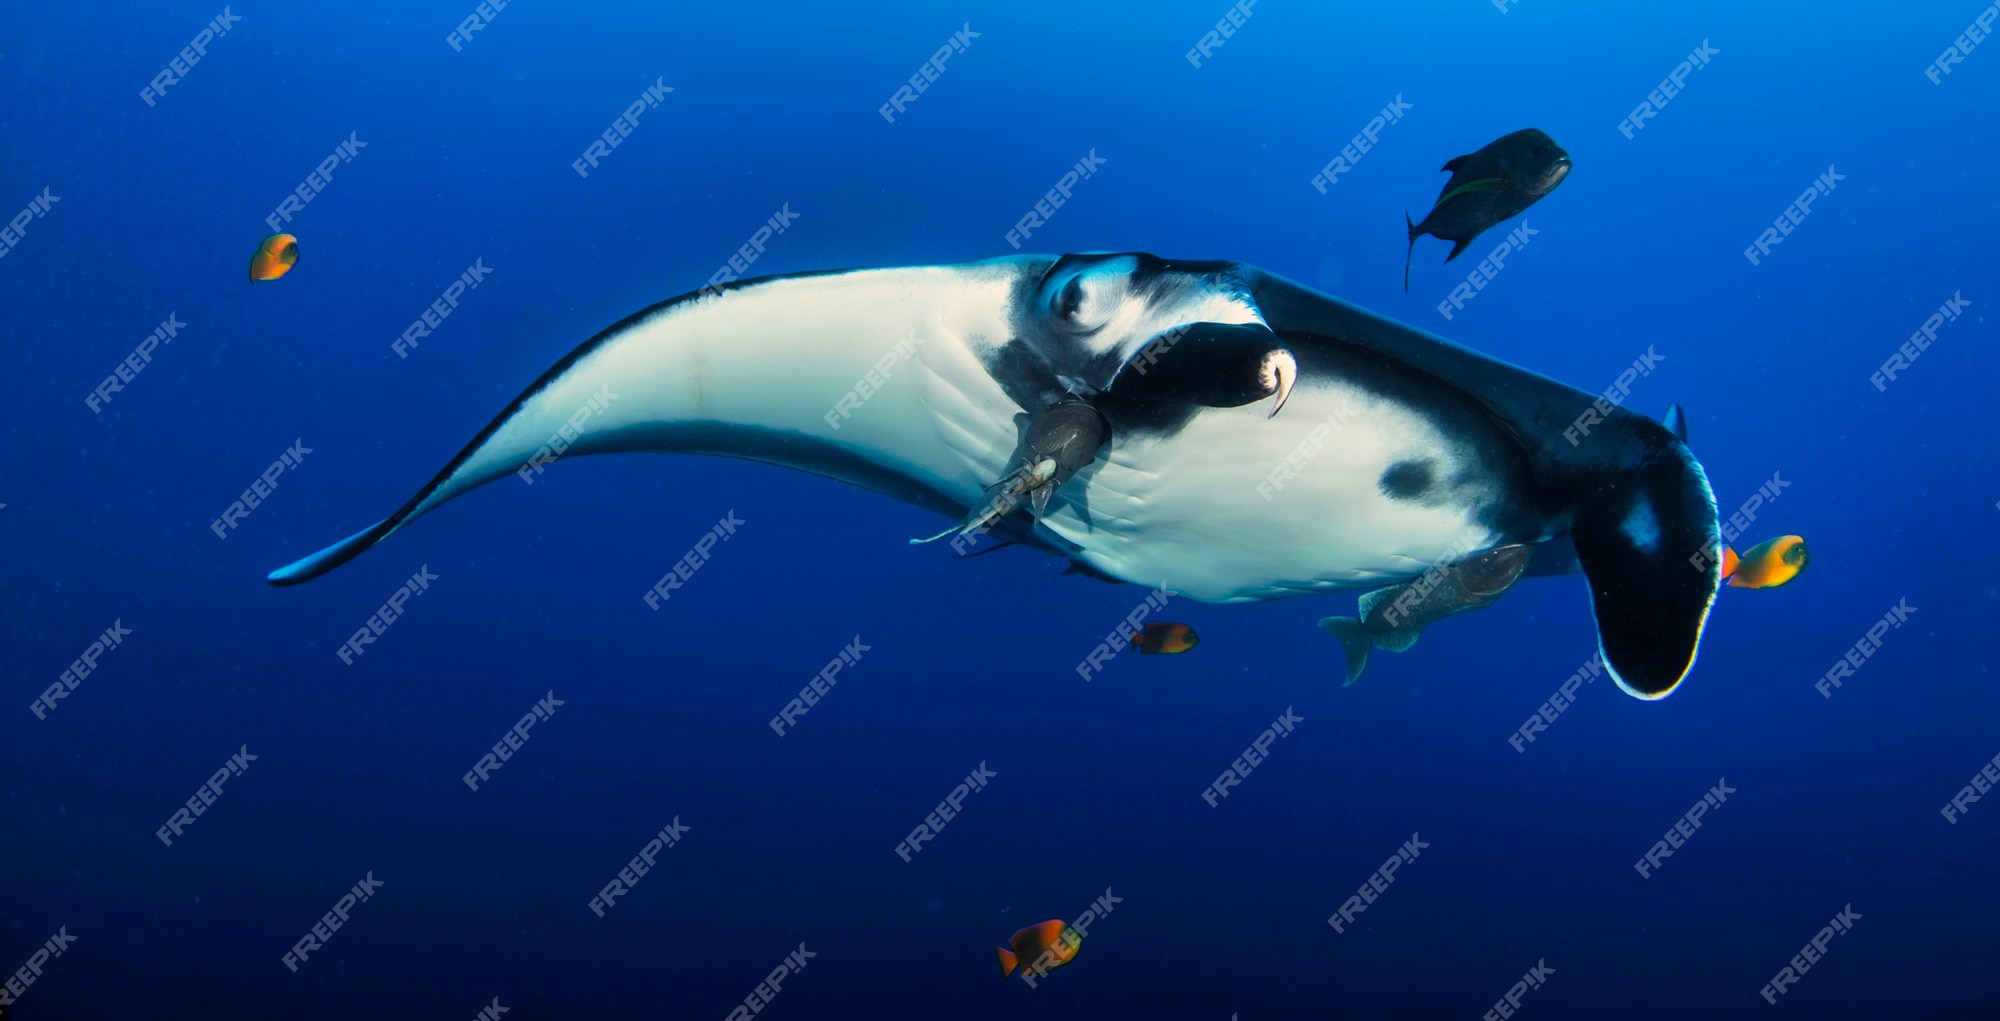 Premium Photo | Elegant manta ray floats under water. giant ocean stingray  feeds on plankton. marine life underwater in blue ocean. observation of  animal world. scuba diving adventure in sea of cortez, coast mexico